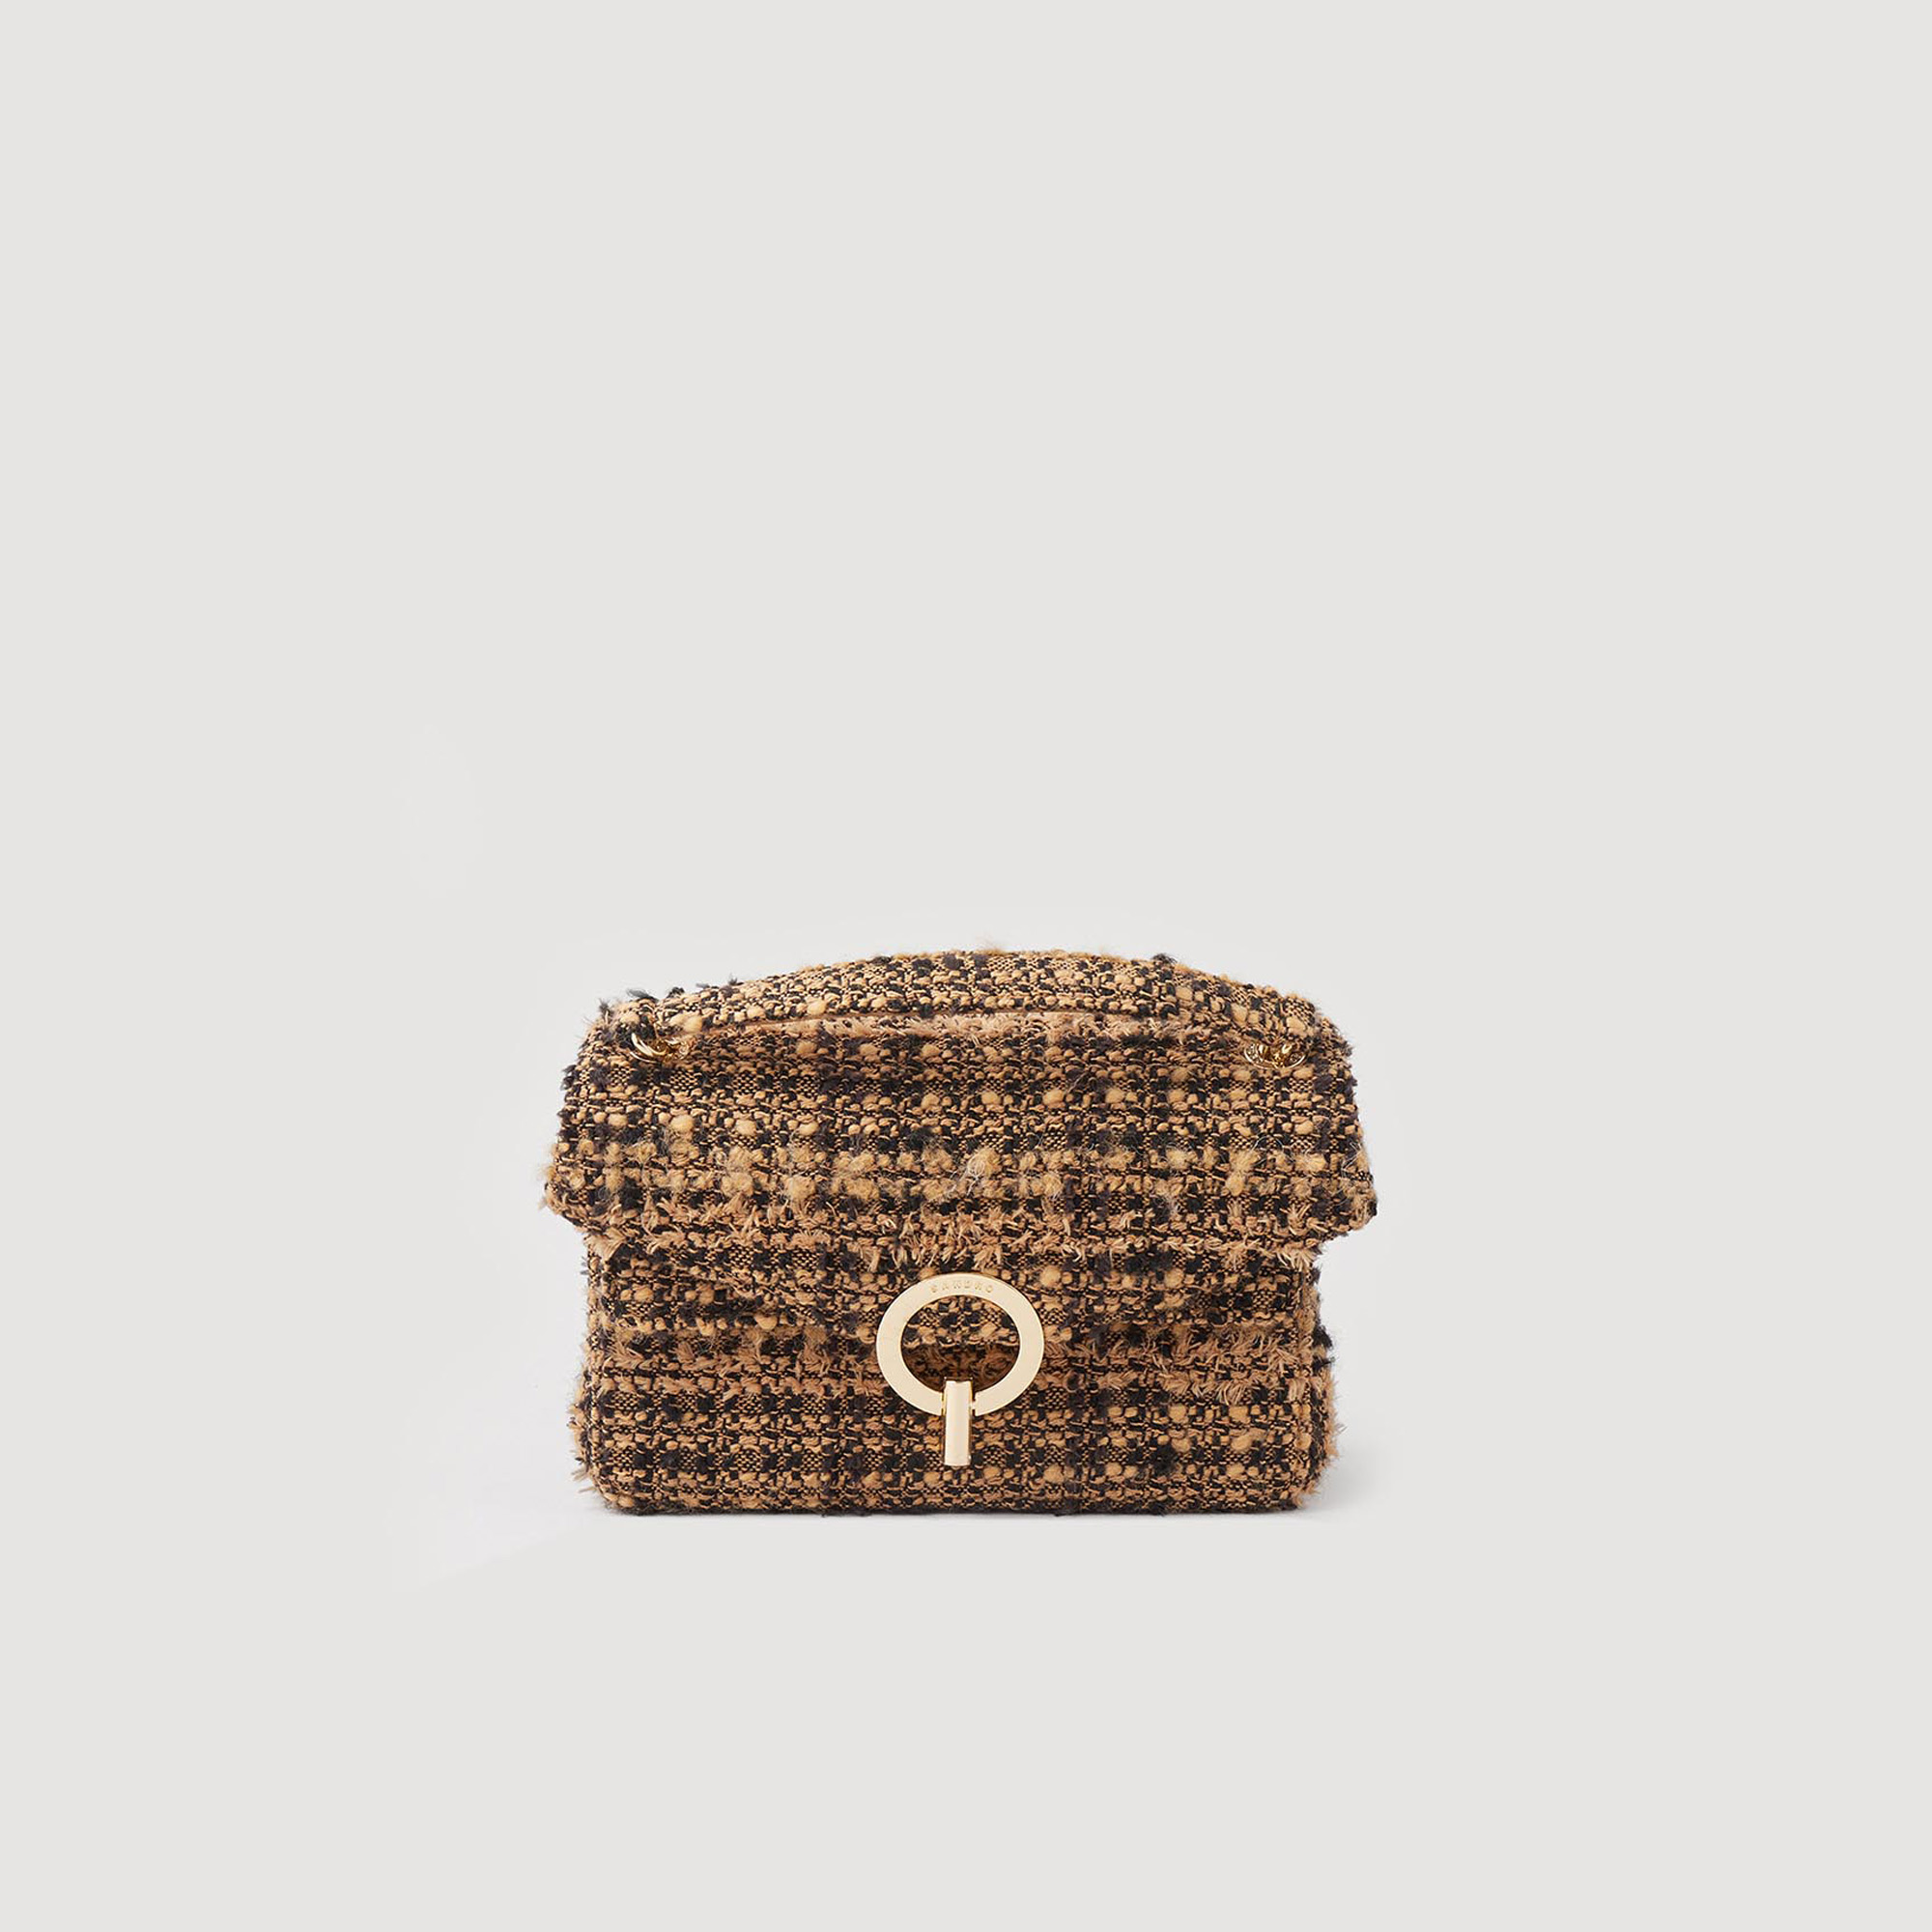 Sandro cotton The classic YZA bag is now available in a tweed version